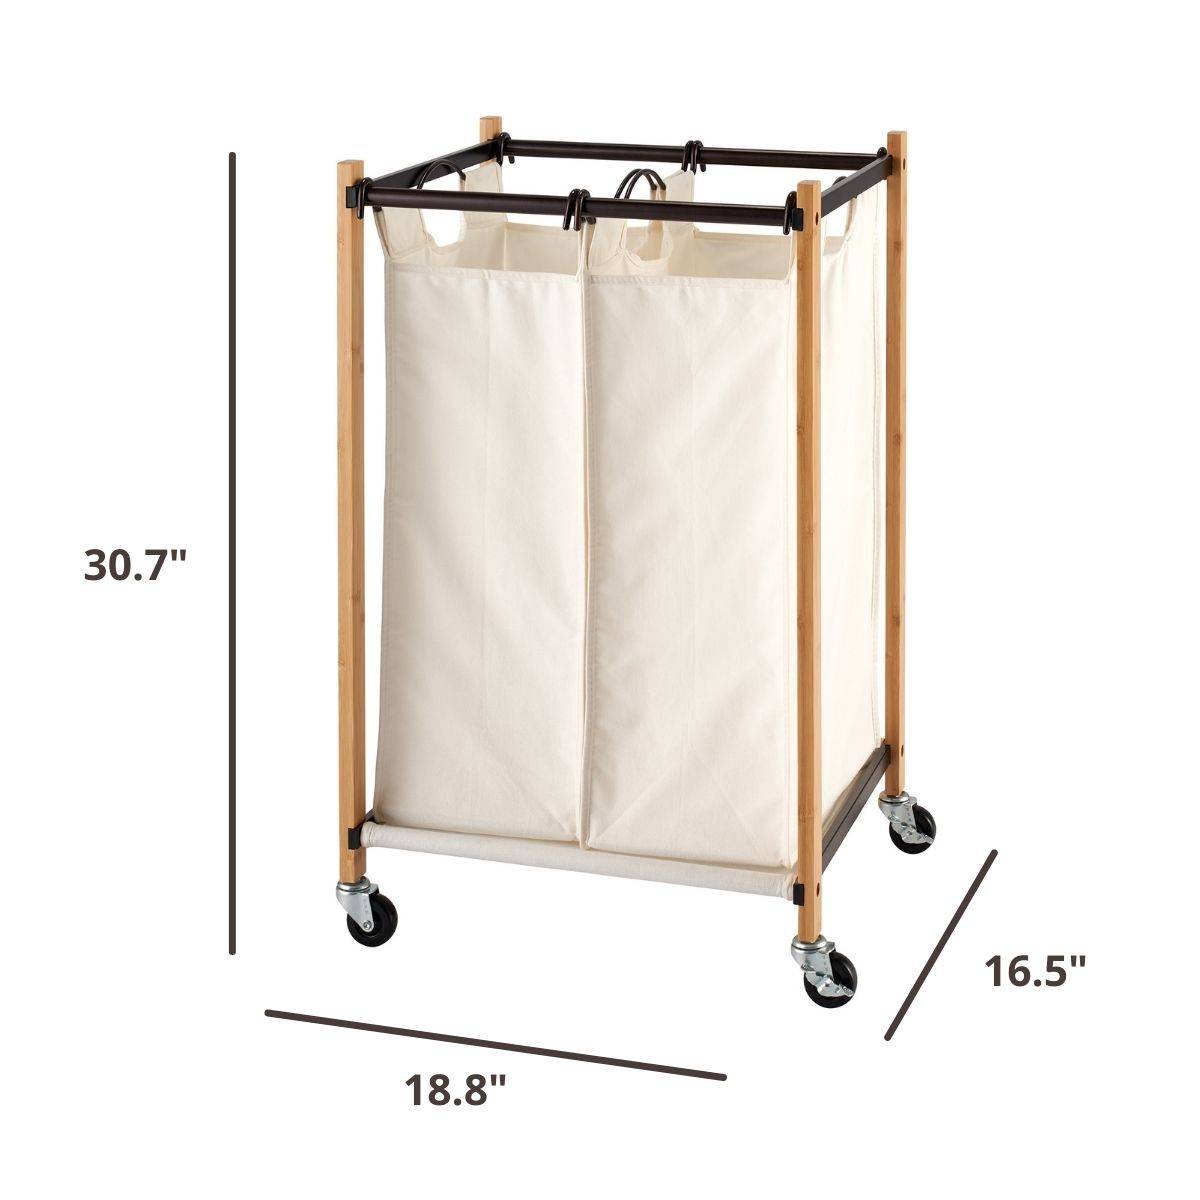 small compact laundry cart, 30.7 inches tall by 18.8 inches wide